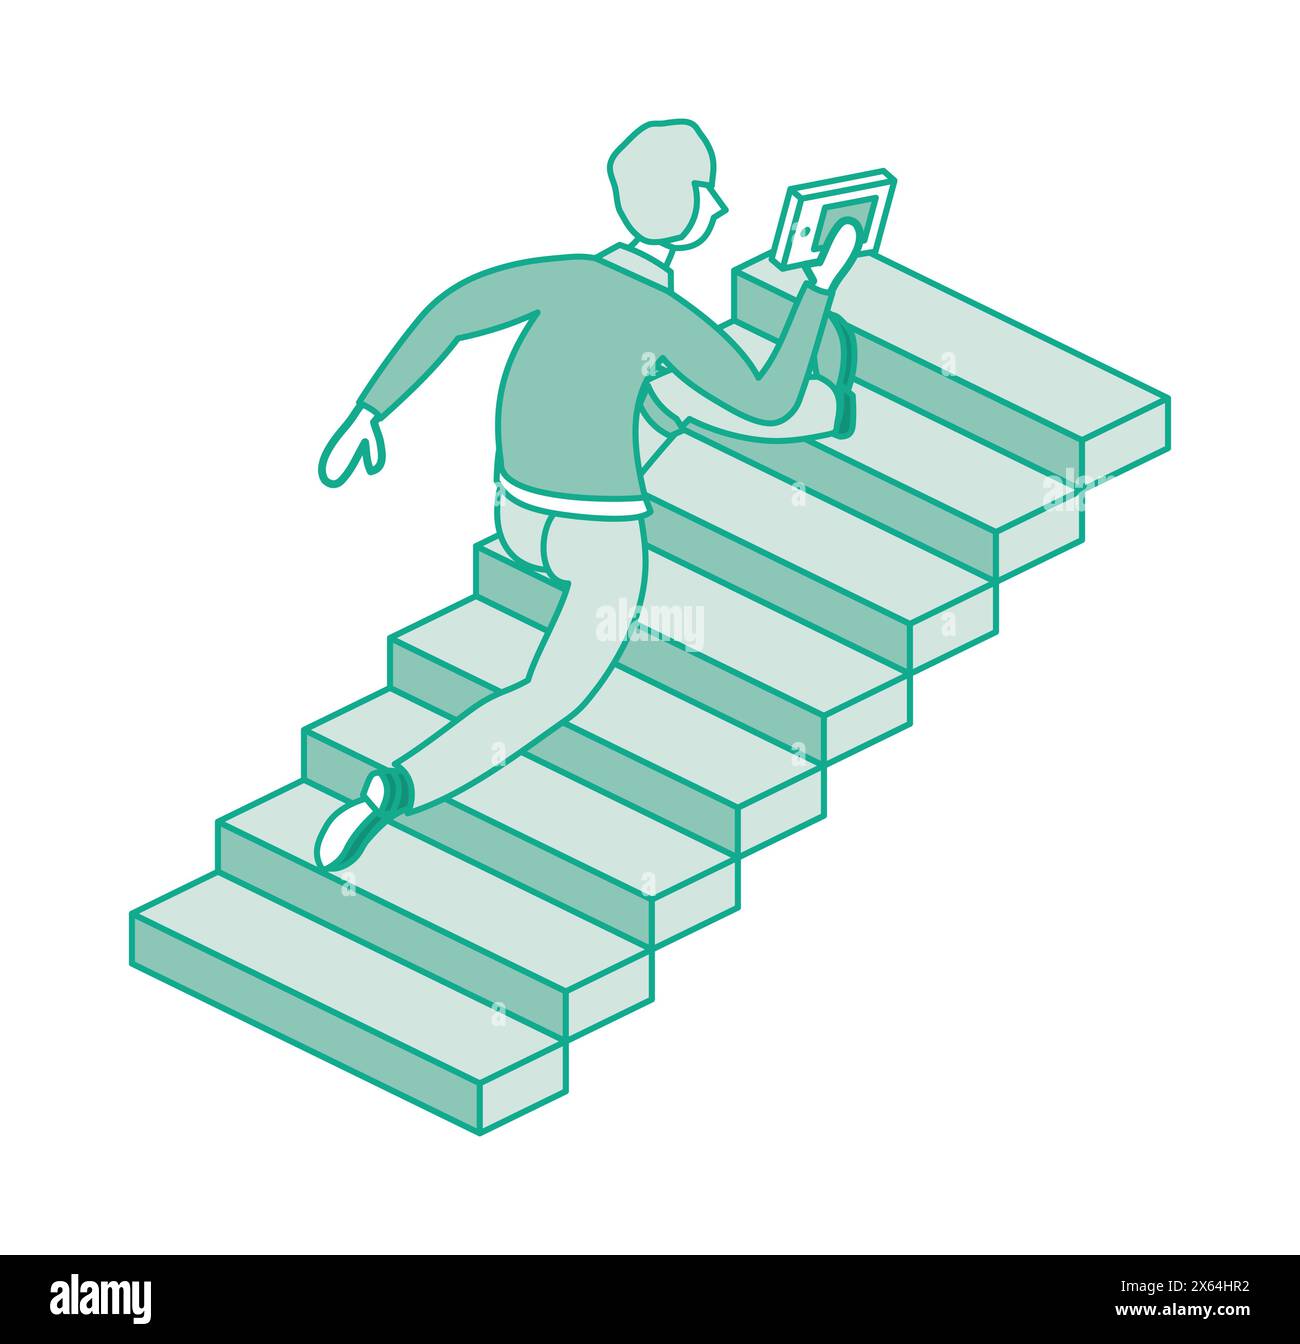 Man run up set of stairs. He is holding book in hand. Isometric concept of success, urgency and determination. Businessman climbing stairs of success. Stock Vector